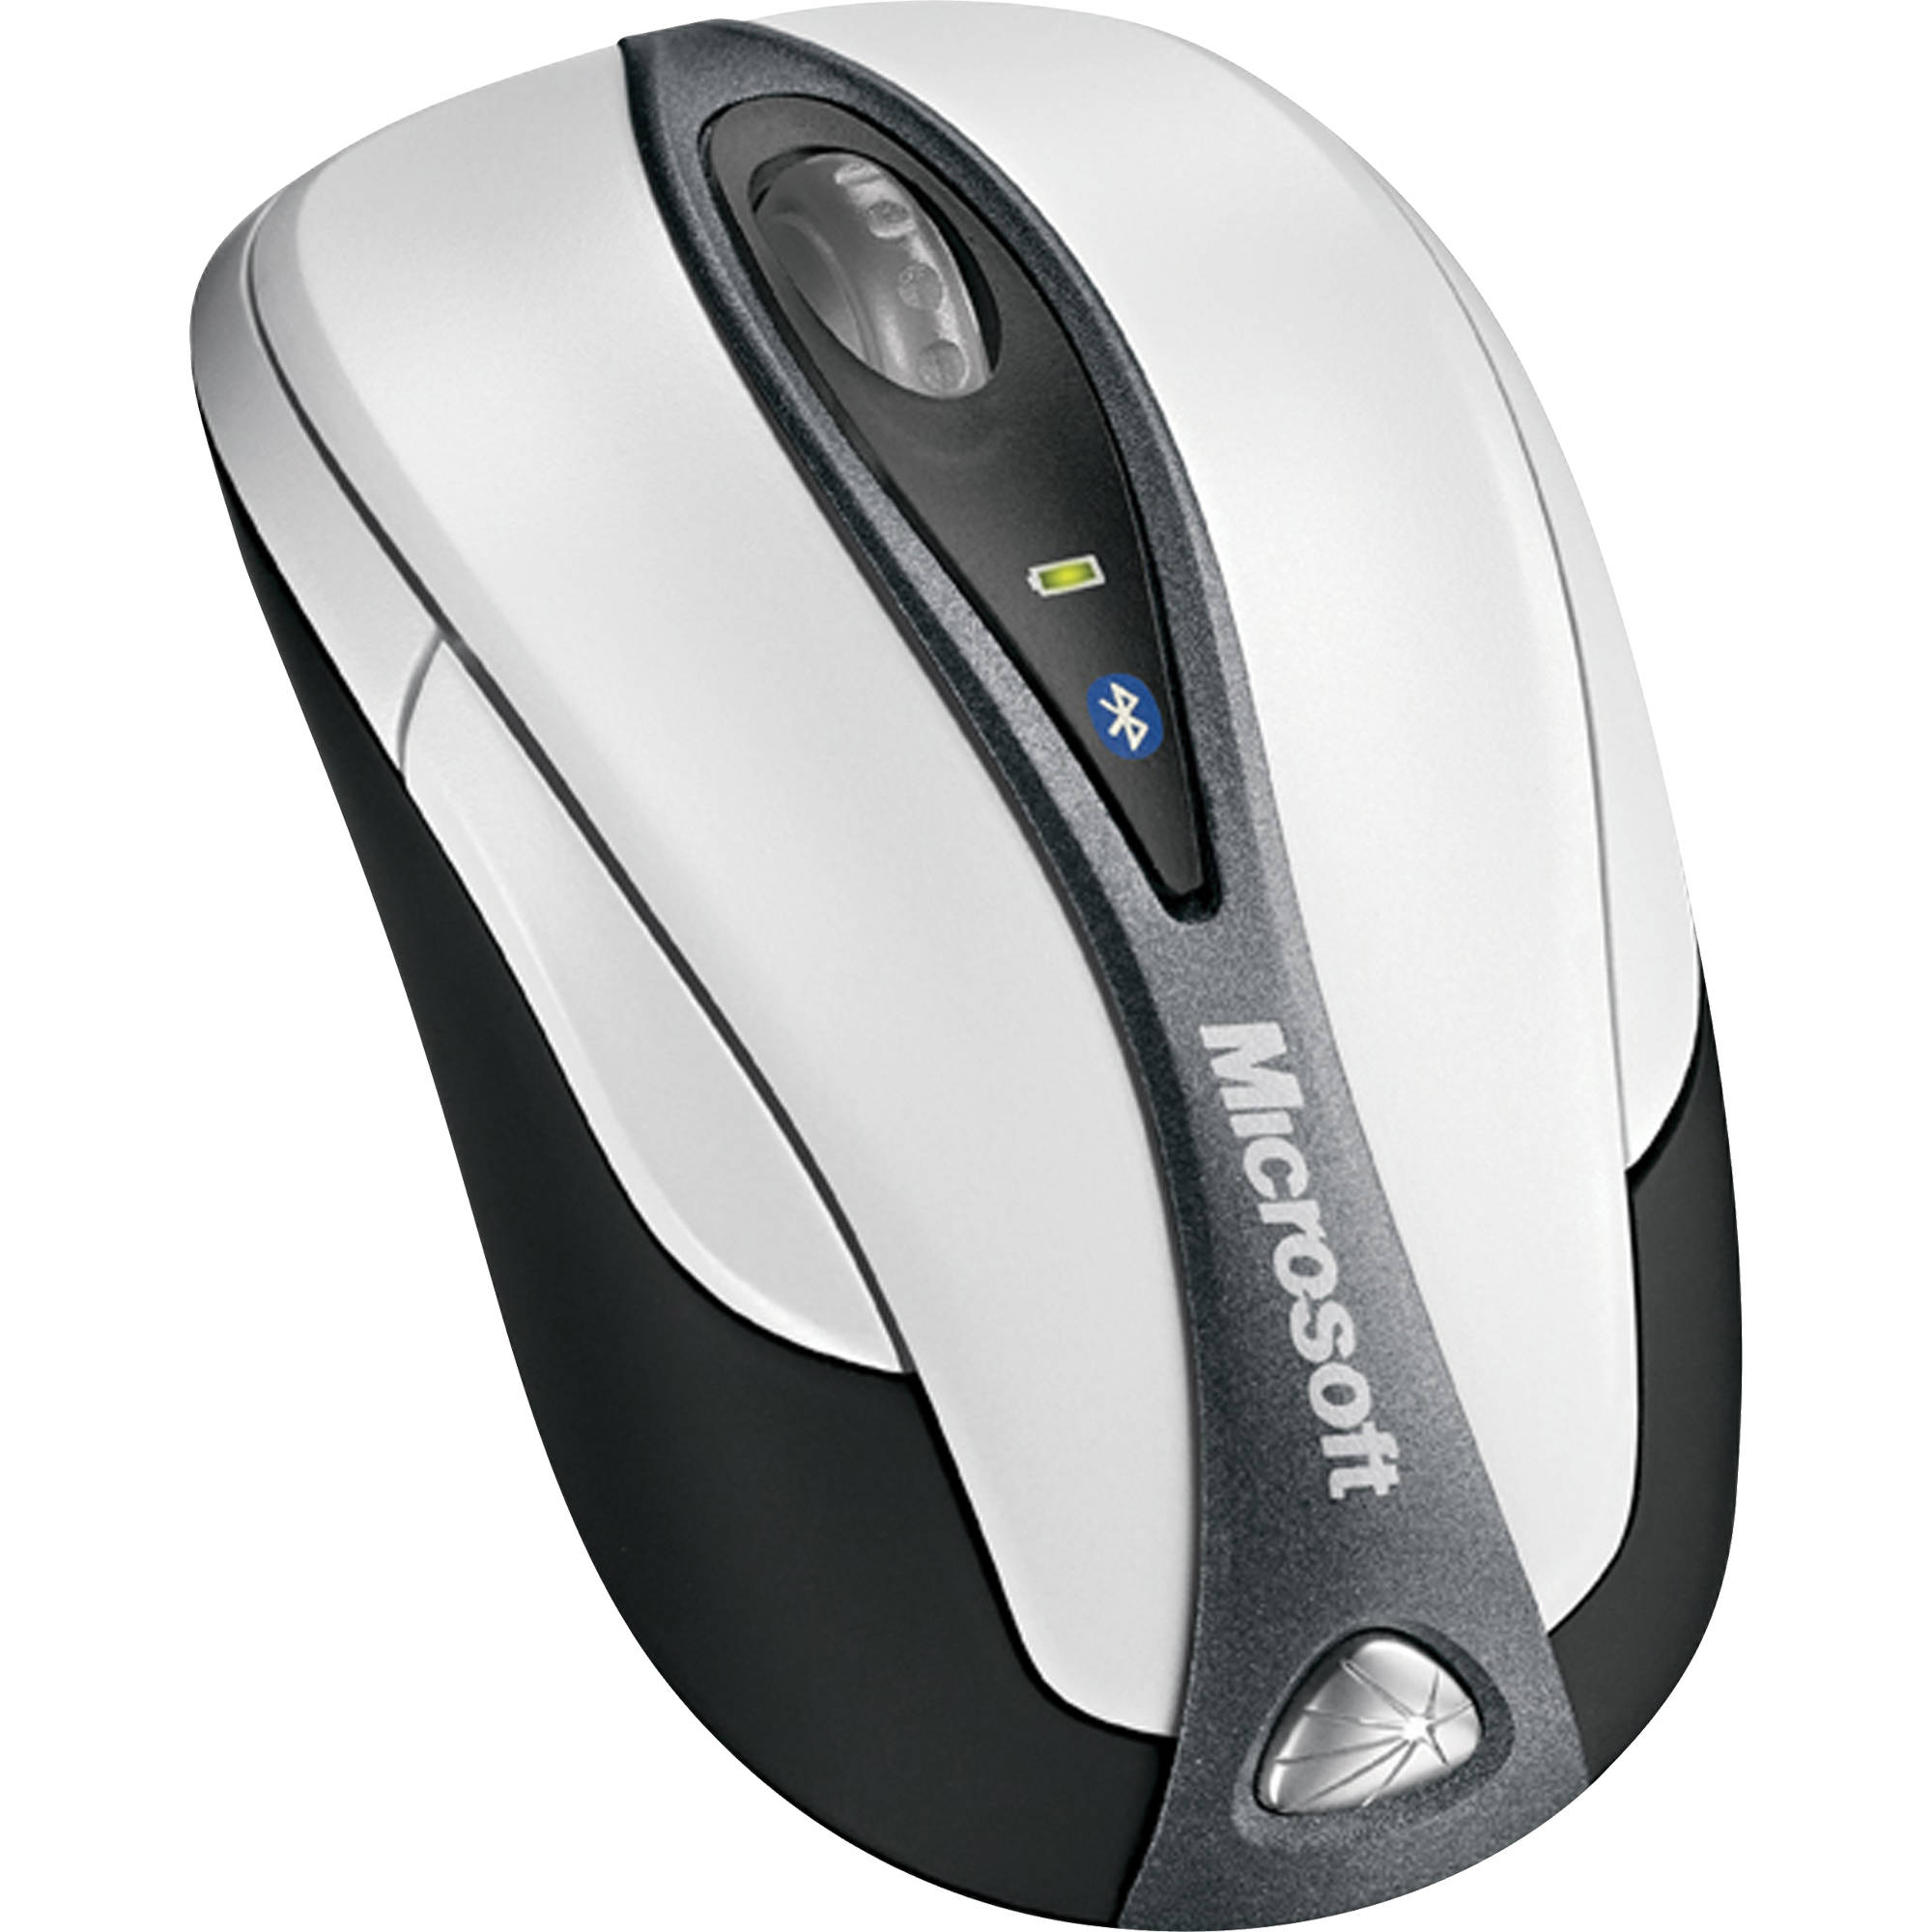 Microsoft Notebook Mouse 5000 Driver Download